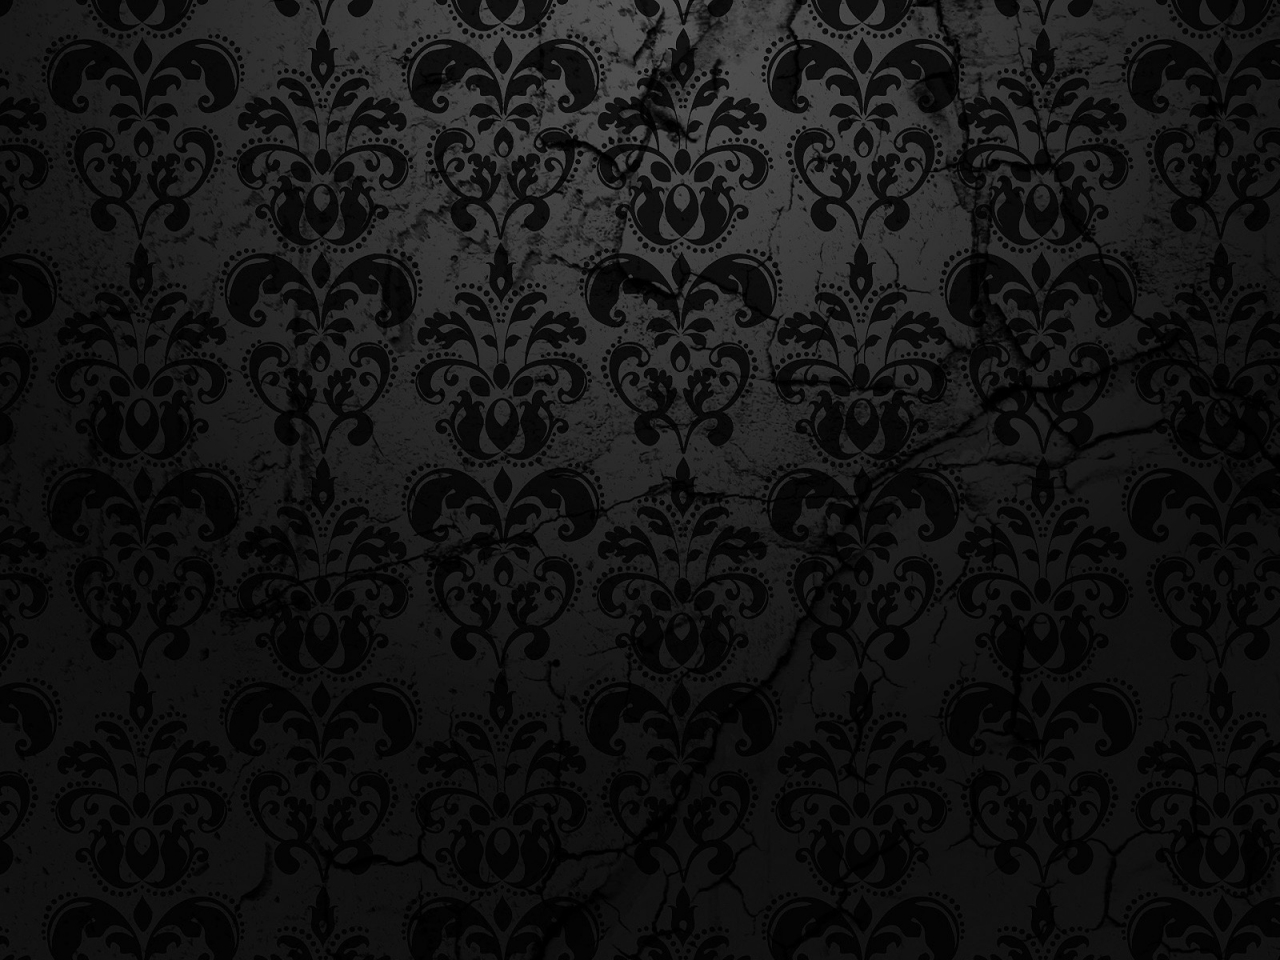 Damask for 1280 x 960 resolution